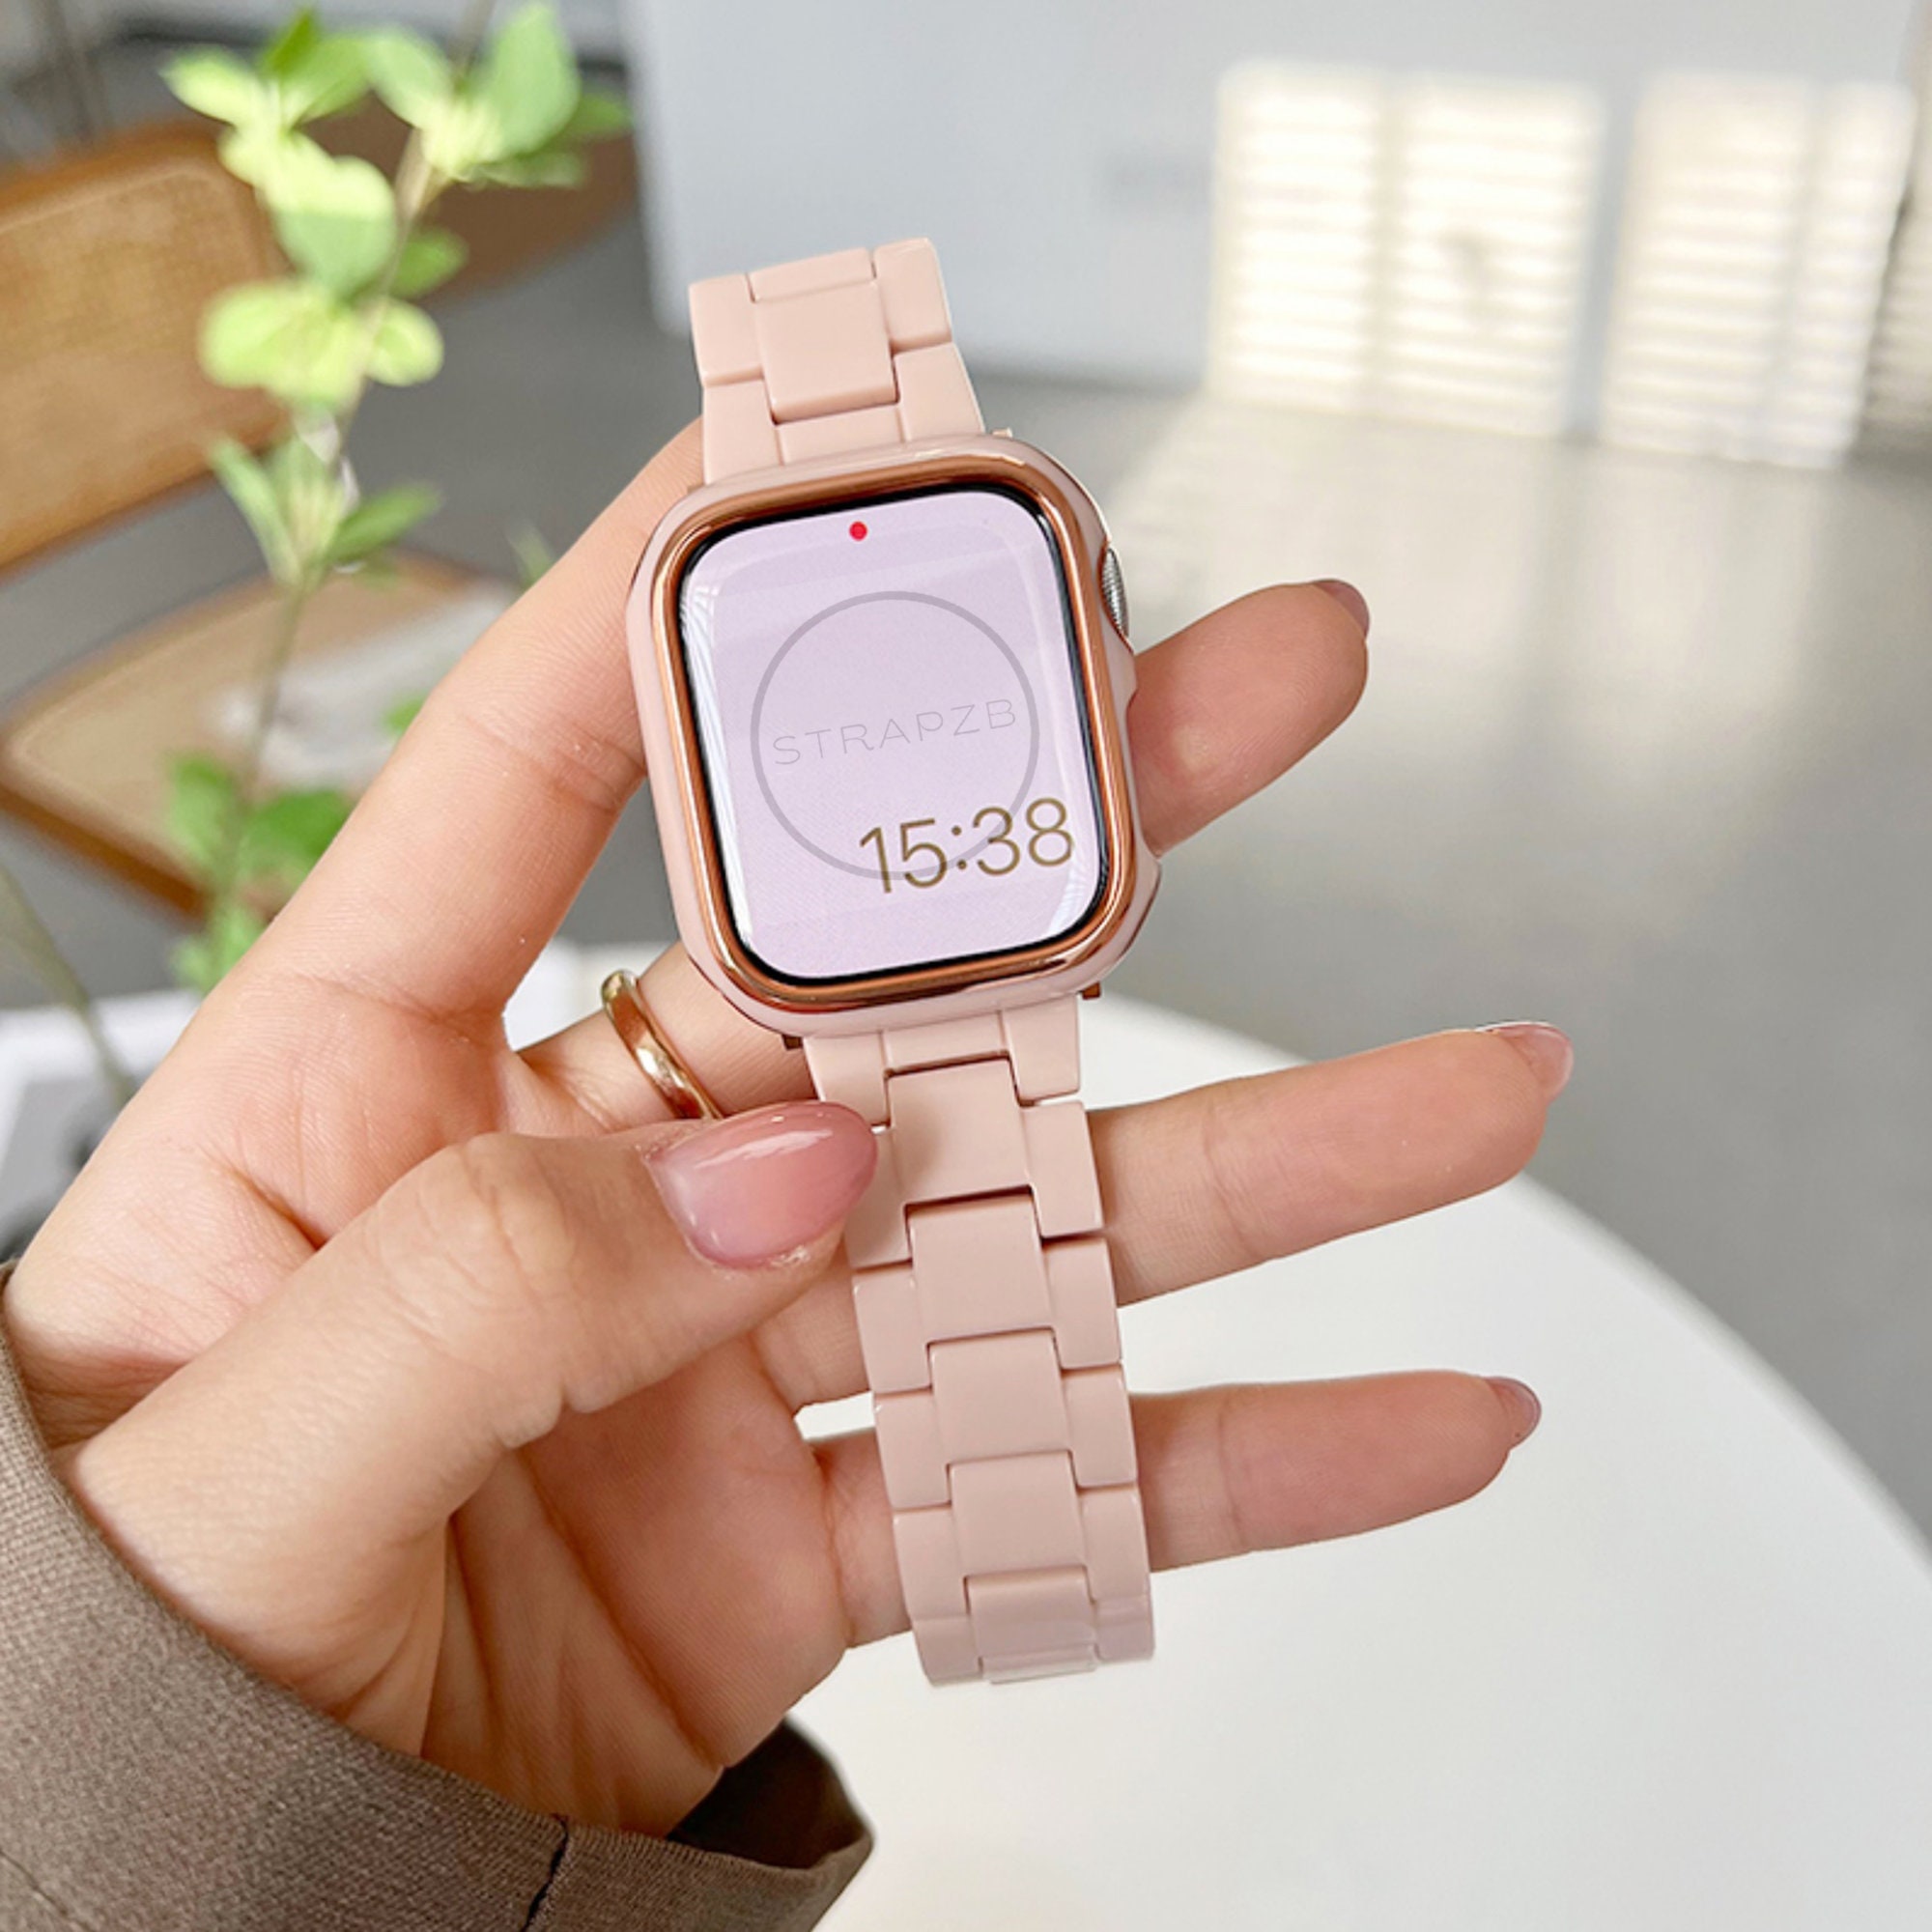 Pretty in pink Apple Watch band ✨🤍 #lvinspo #girlywatchband